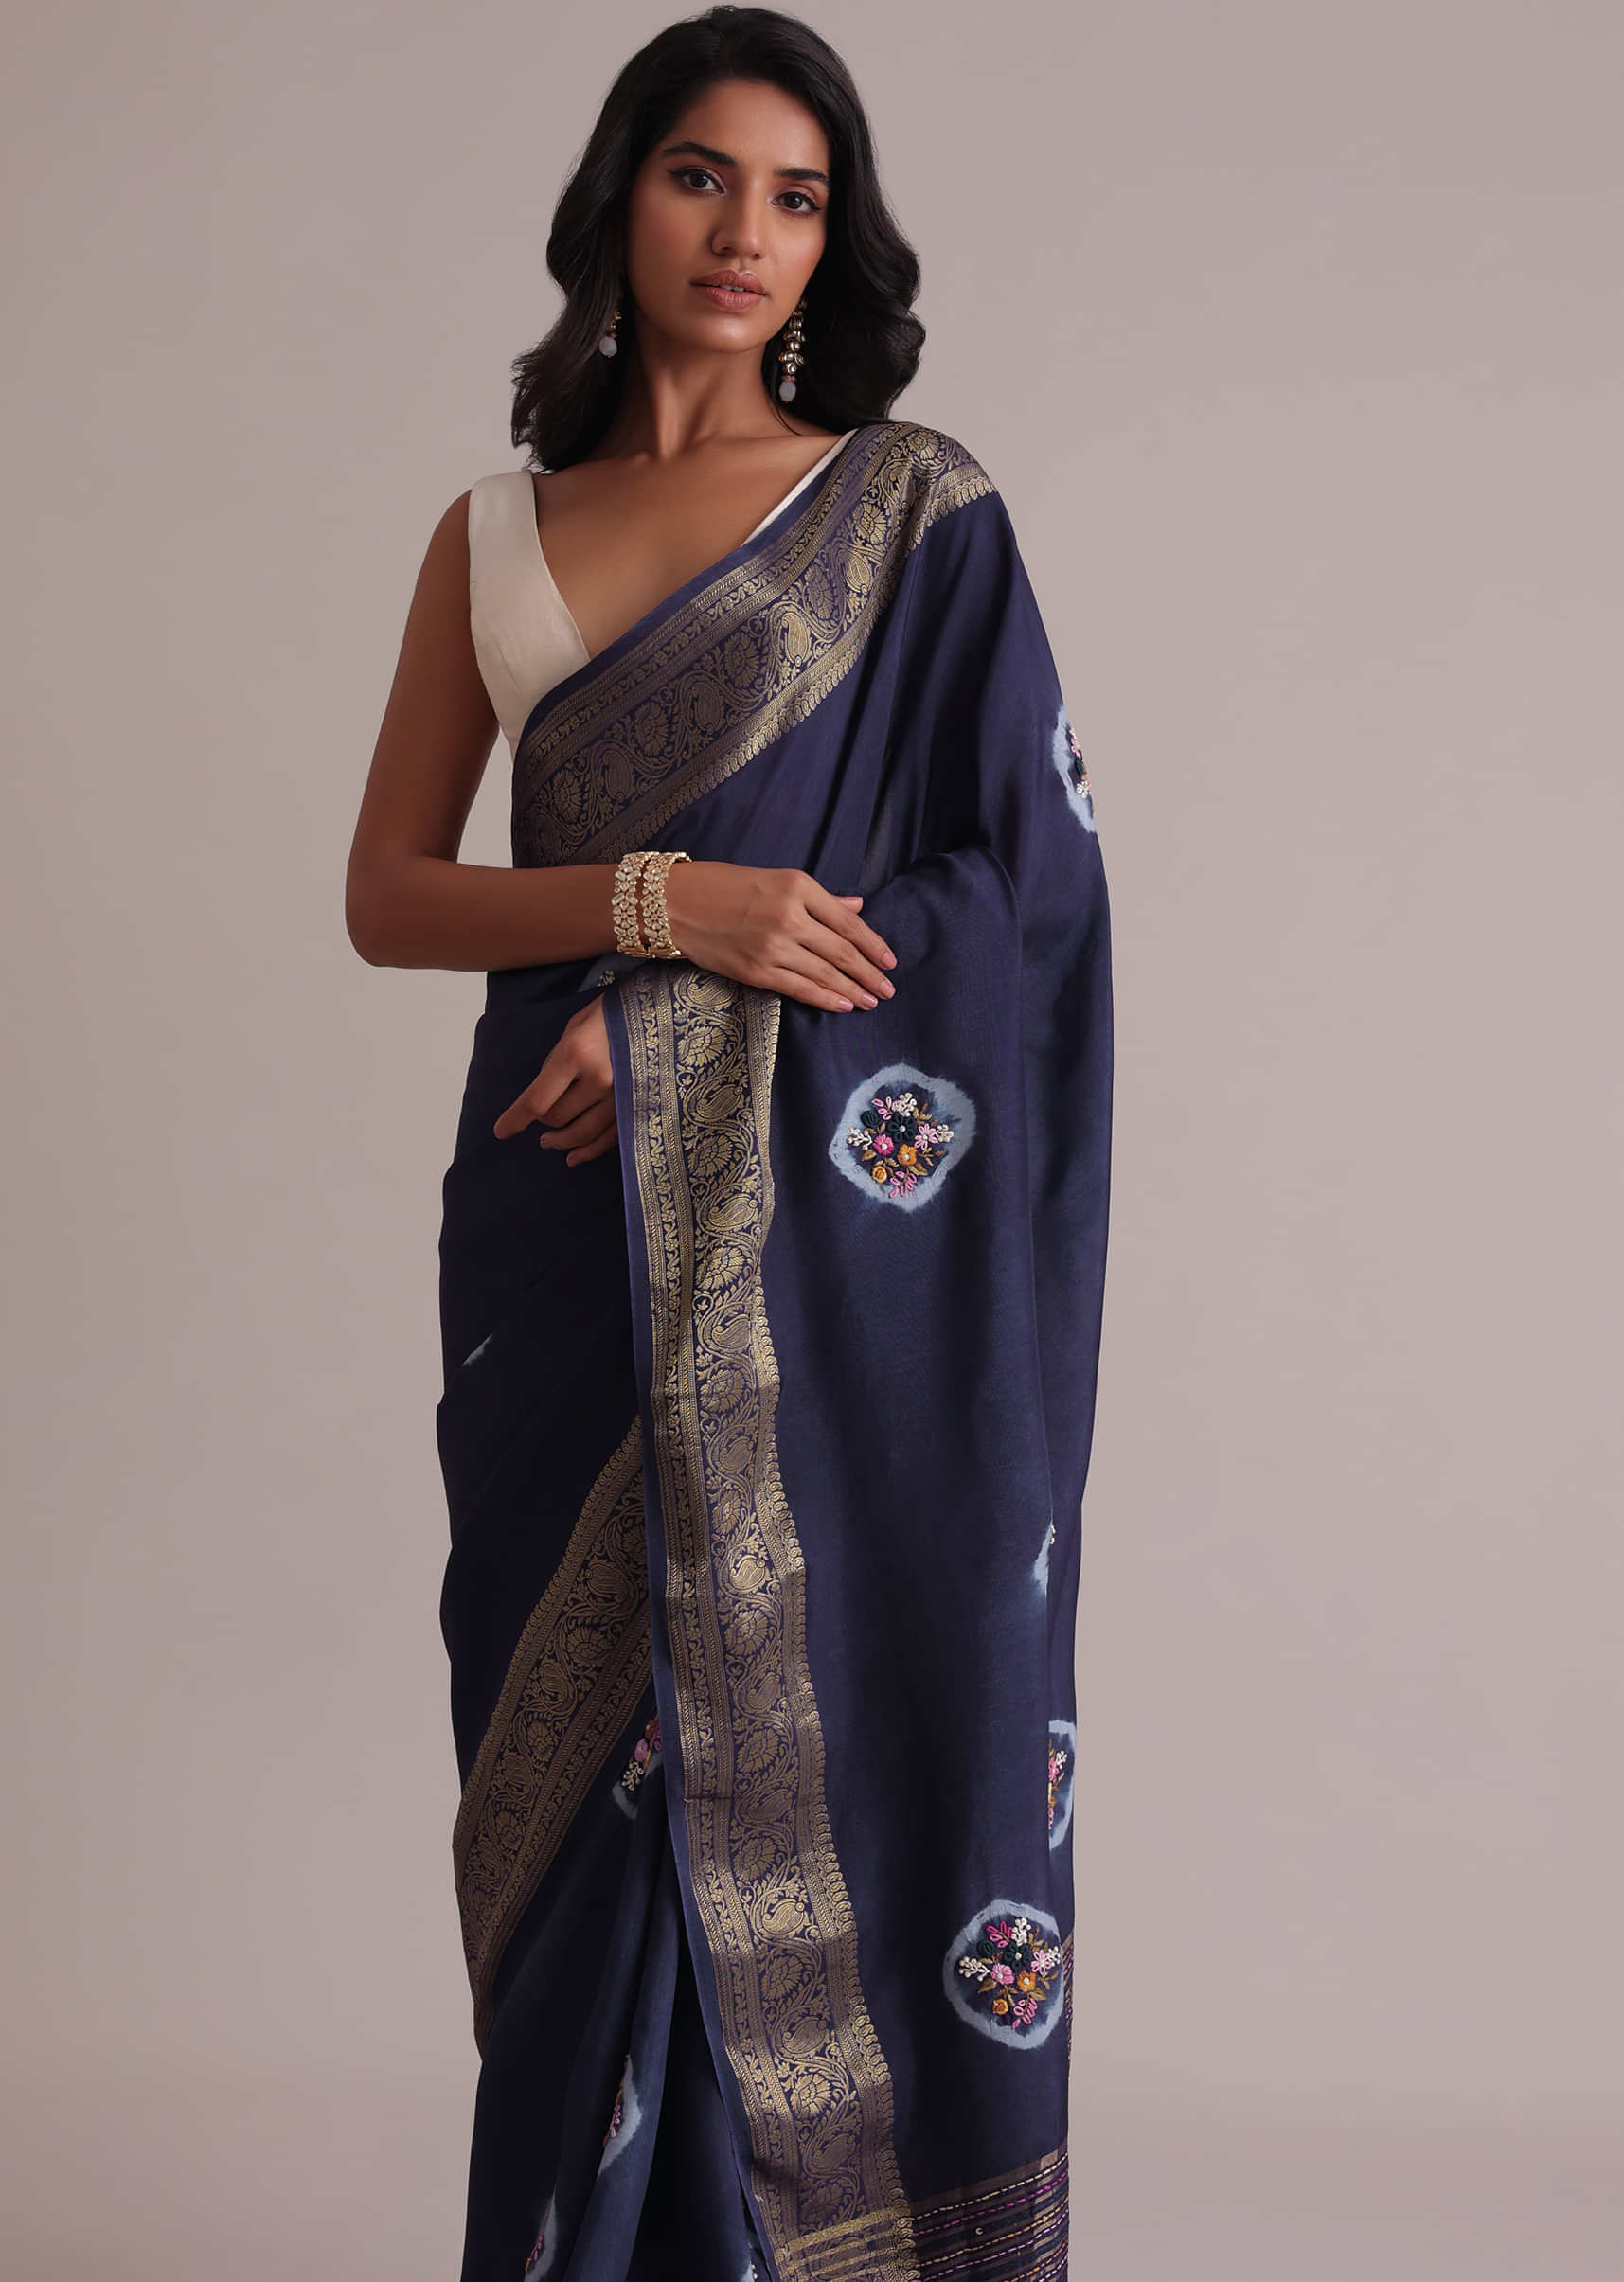 Blue Resham 3D Bud Embroidered Saree With Brocade And Thread Work In Dola Crepe